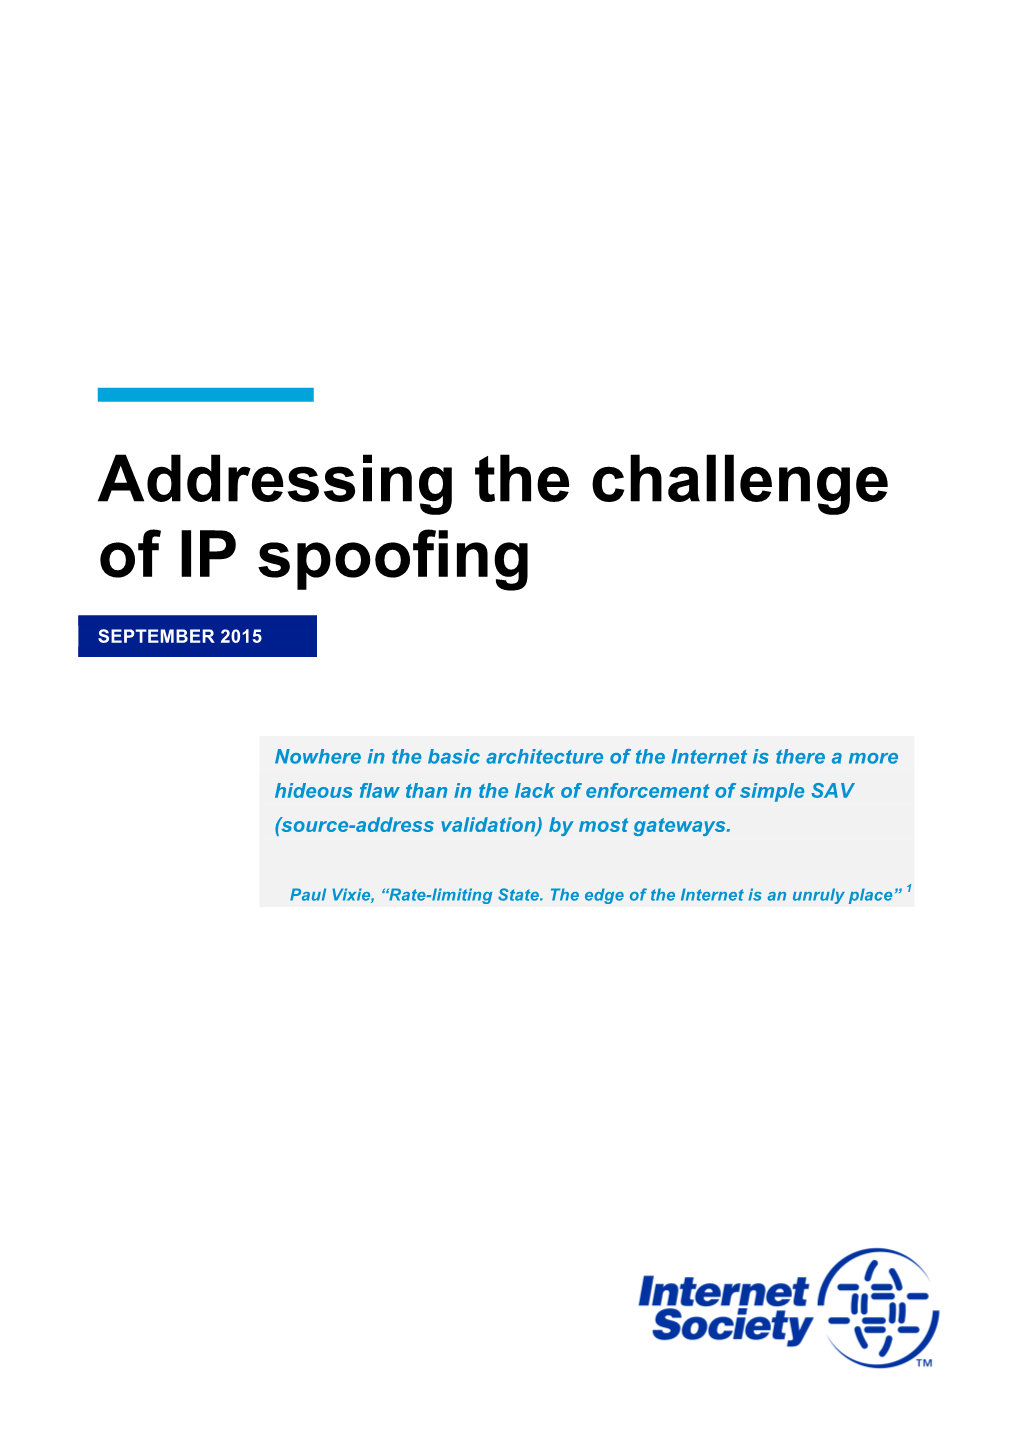 Addressing the Challenge of IP Spoofing